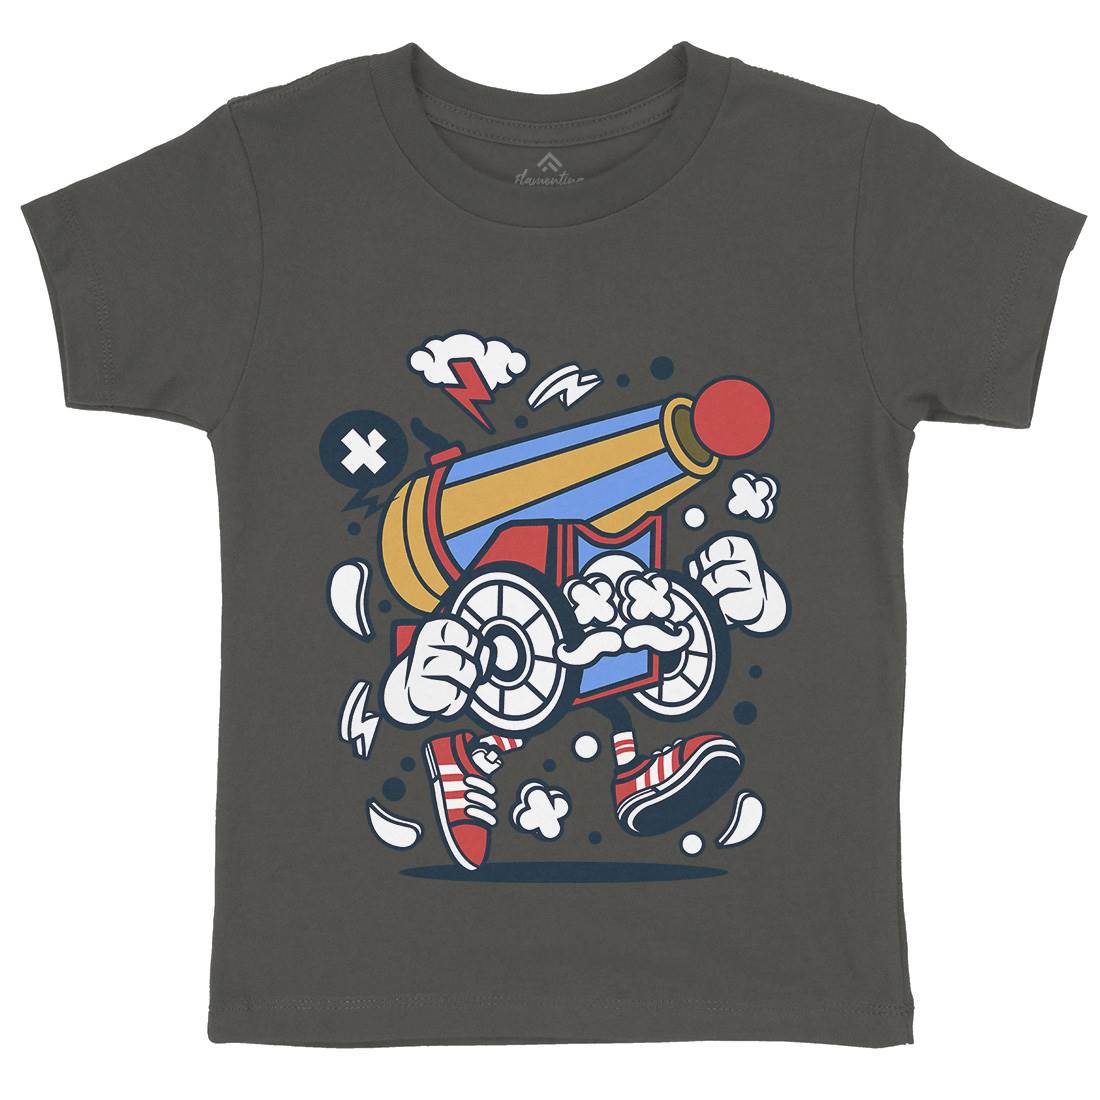 Cannonball Kids Crew Neck T-Shirt Army C042